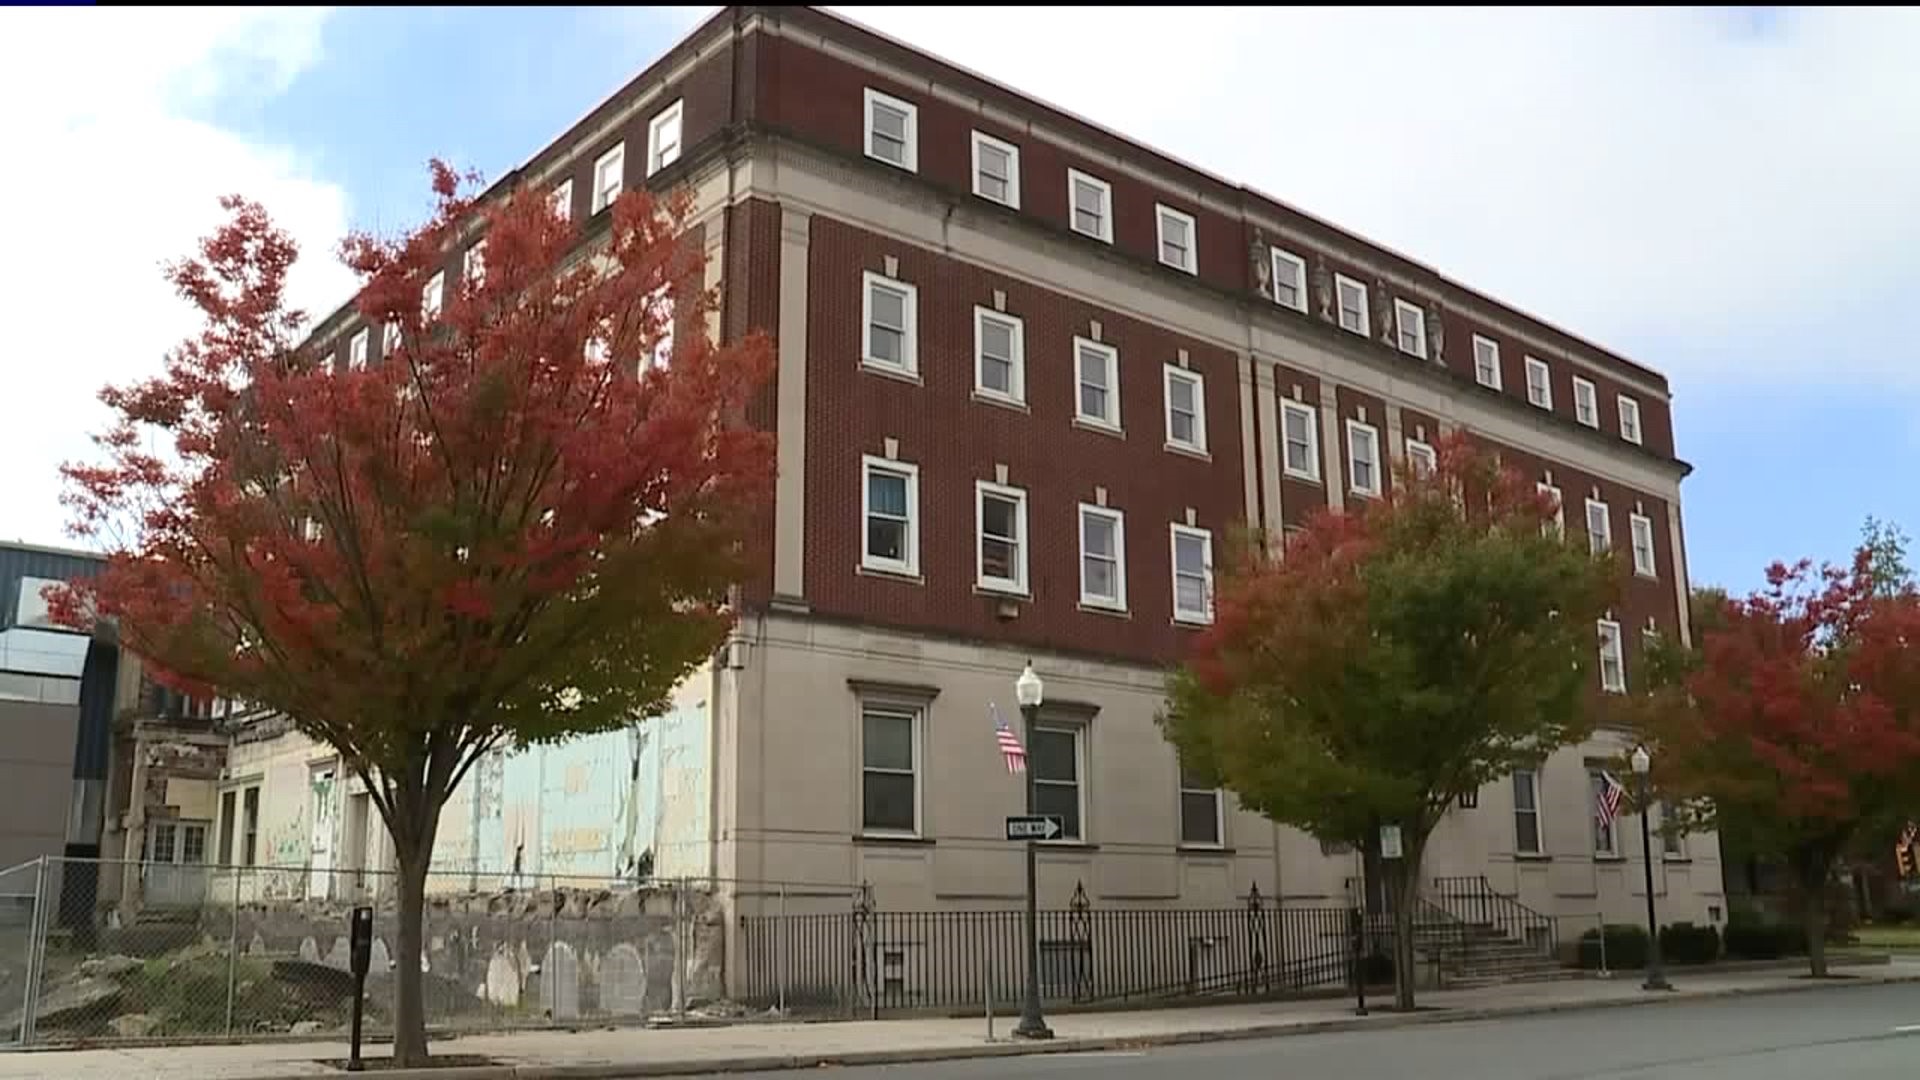 New Apartments Coming to YMCA Building in Williamsport